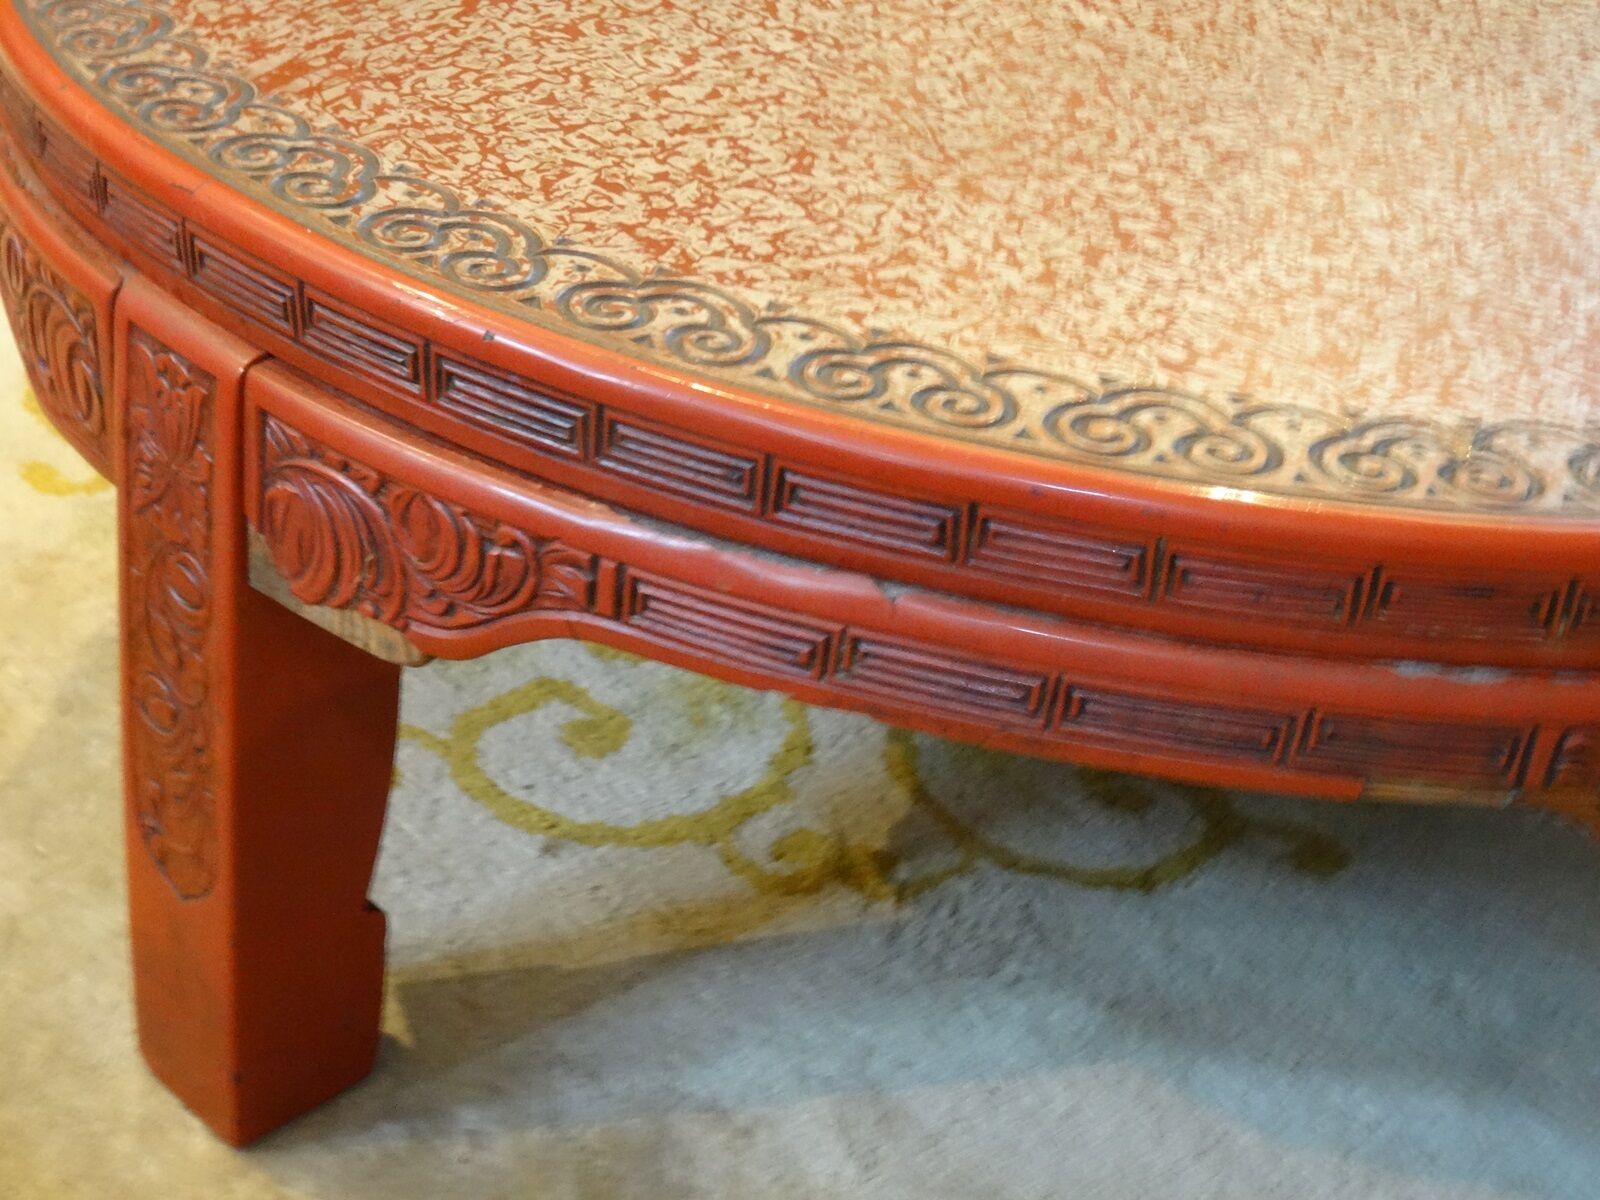 ANTIQUE LATE 19 c. CHINESE LACQUER INTRICATE CARVED CINNABAR COFFEE TABLE Без бренда - фотография #6